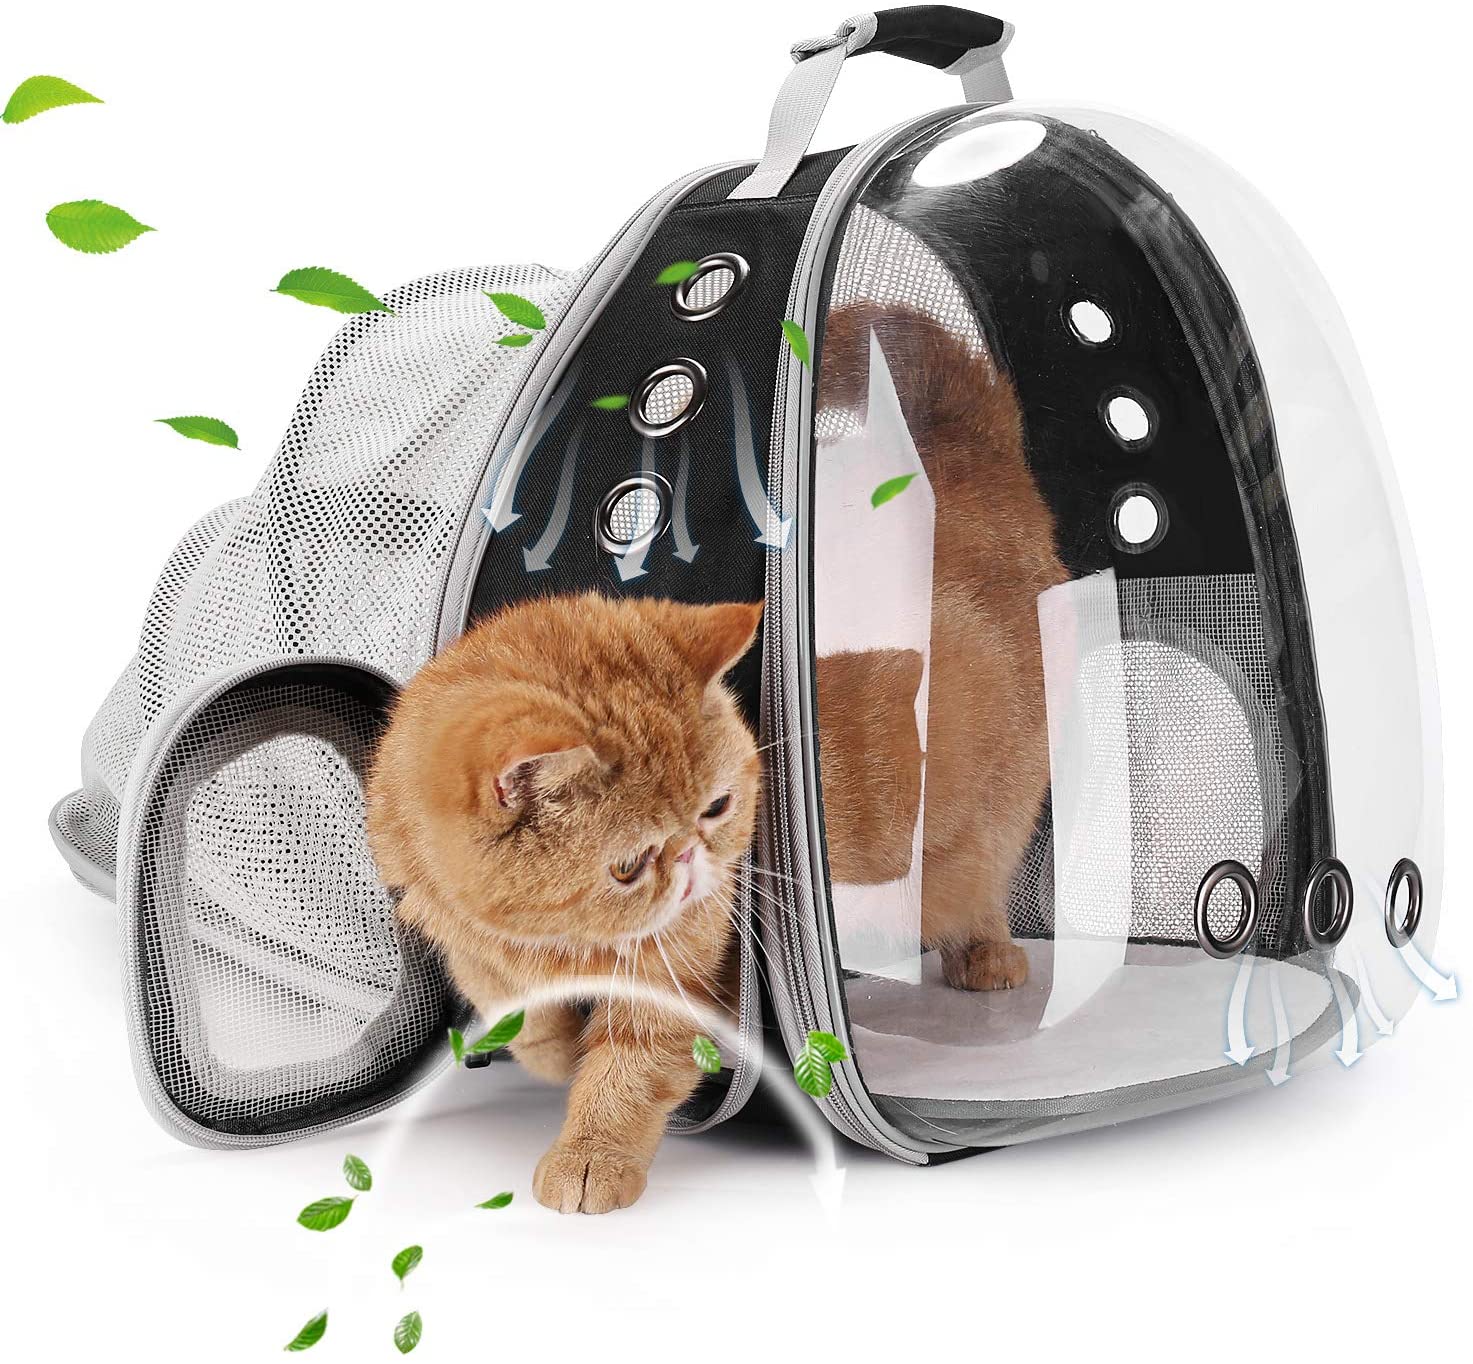 Lollimeow Hamilton Beach Pet Carrier Backpack, Cats and Puppies, Airline-Approved, Walking & Outdoor Use (Black-Expandable) - image 1 of 8